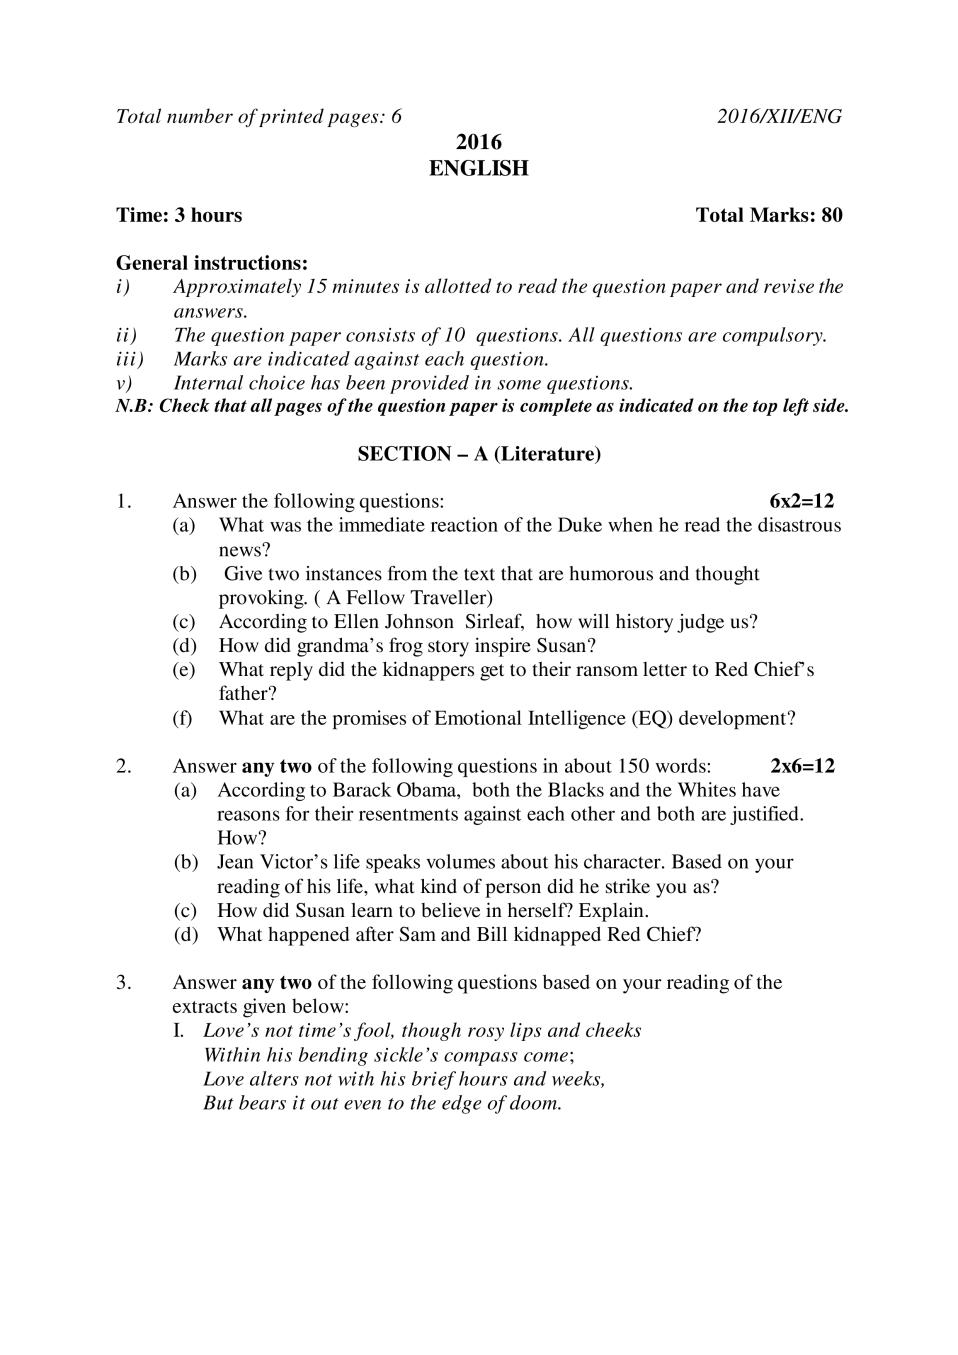 nbse-class-12-question-paper-2016-for-english